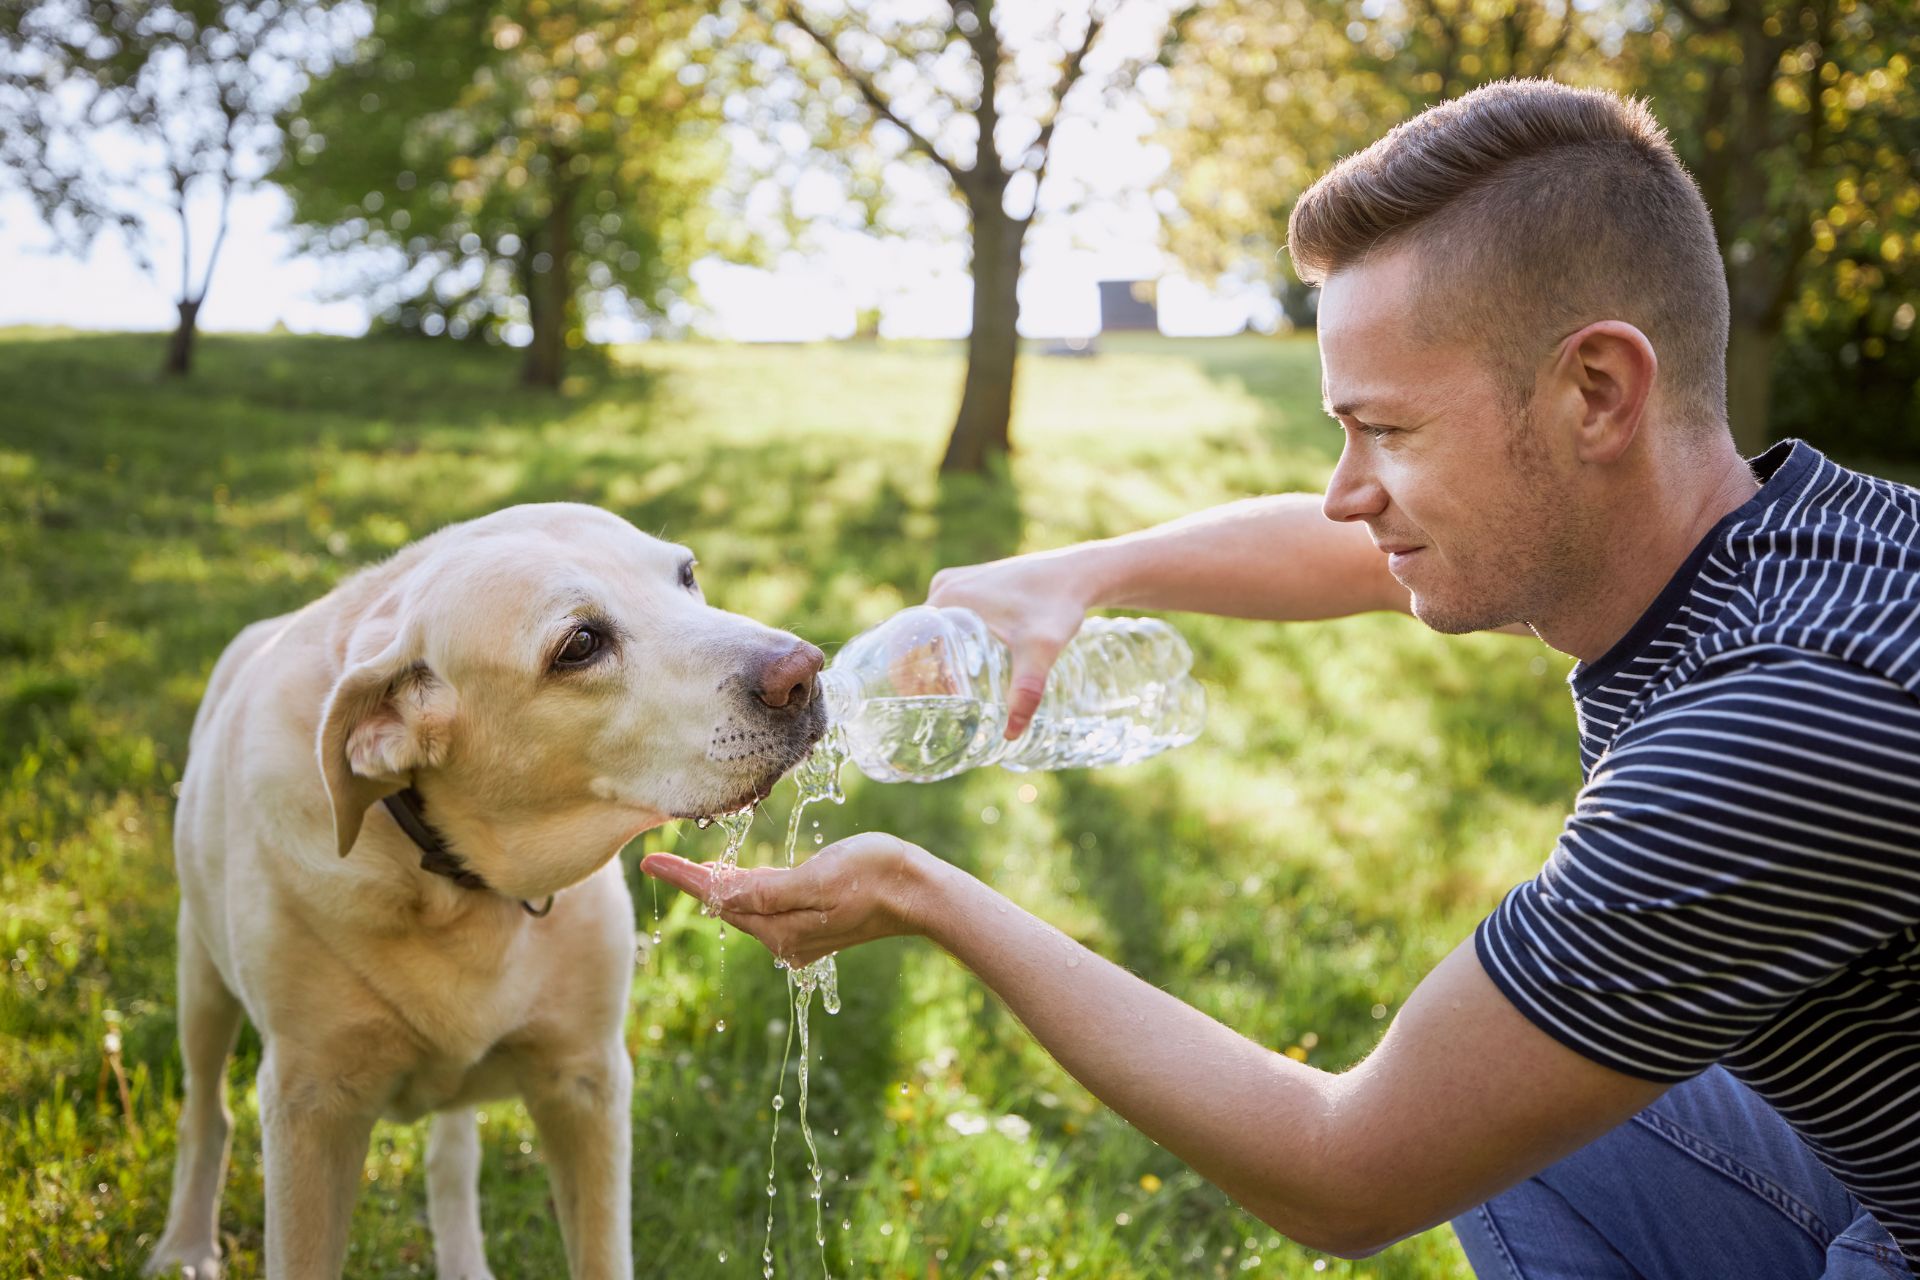 How to Recognize Dehydration and Heat Stroke in Dogs